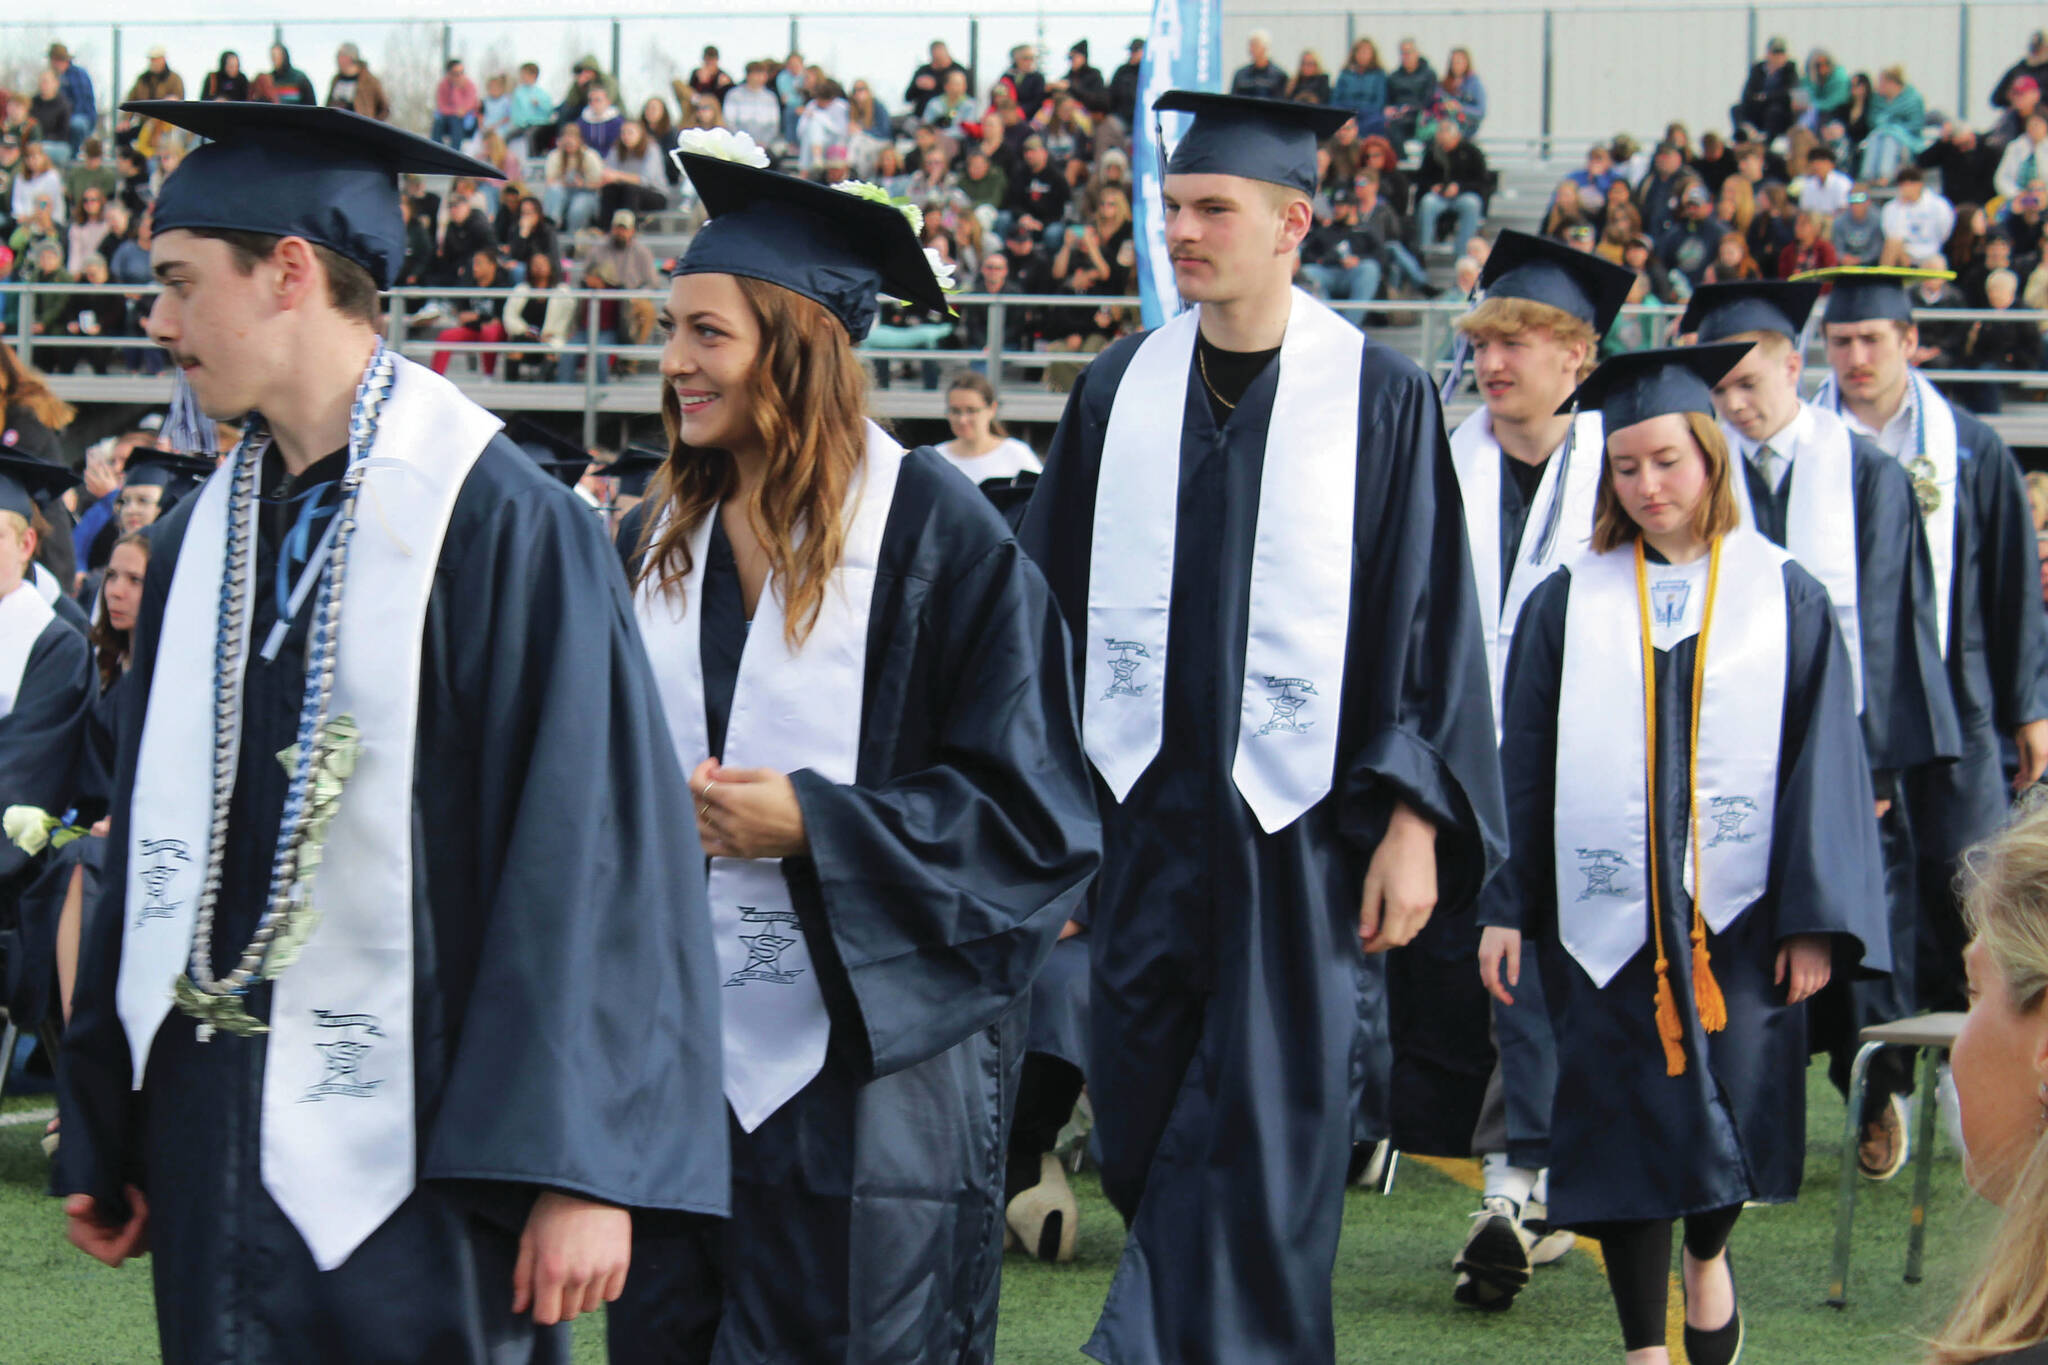 Soldotna High School graduates line up to receive diplomas during a ceremony on Monday. (Ashlyn O’Hara/Peninsula Clarion)